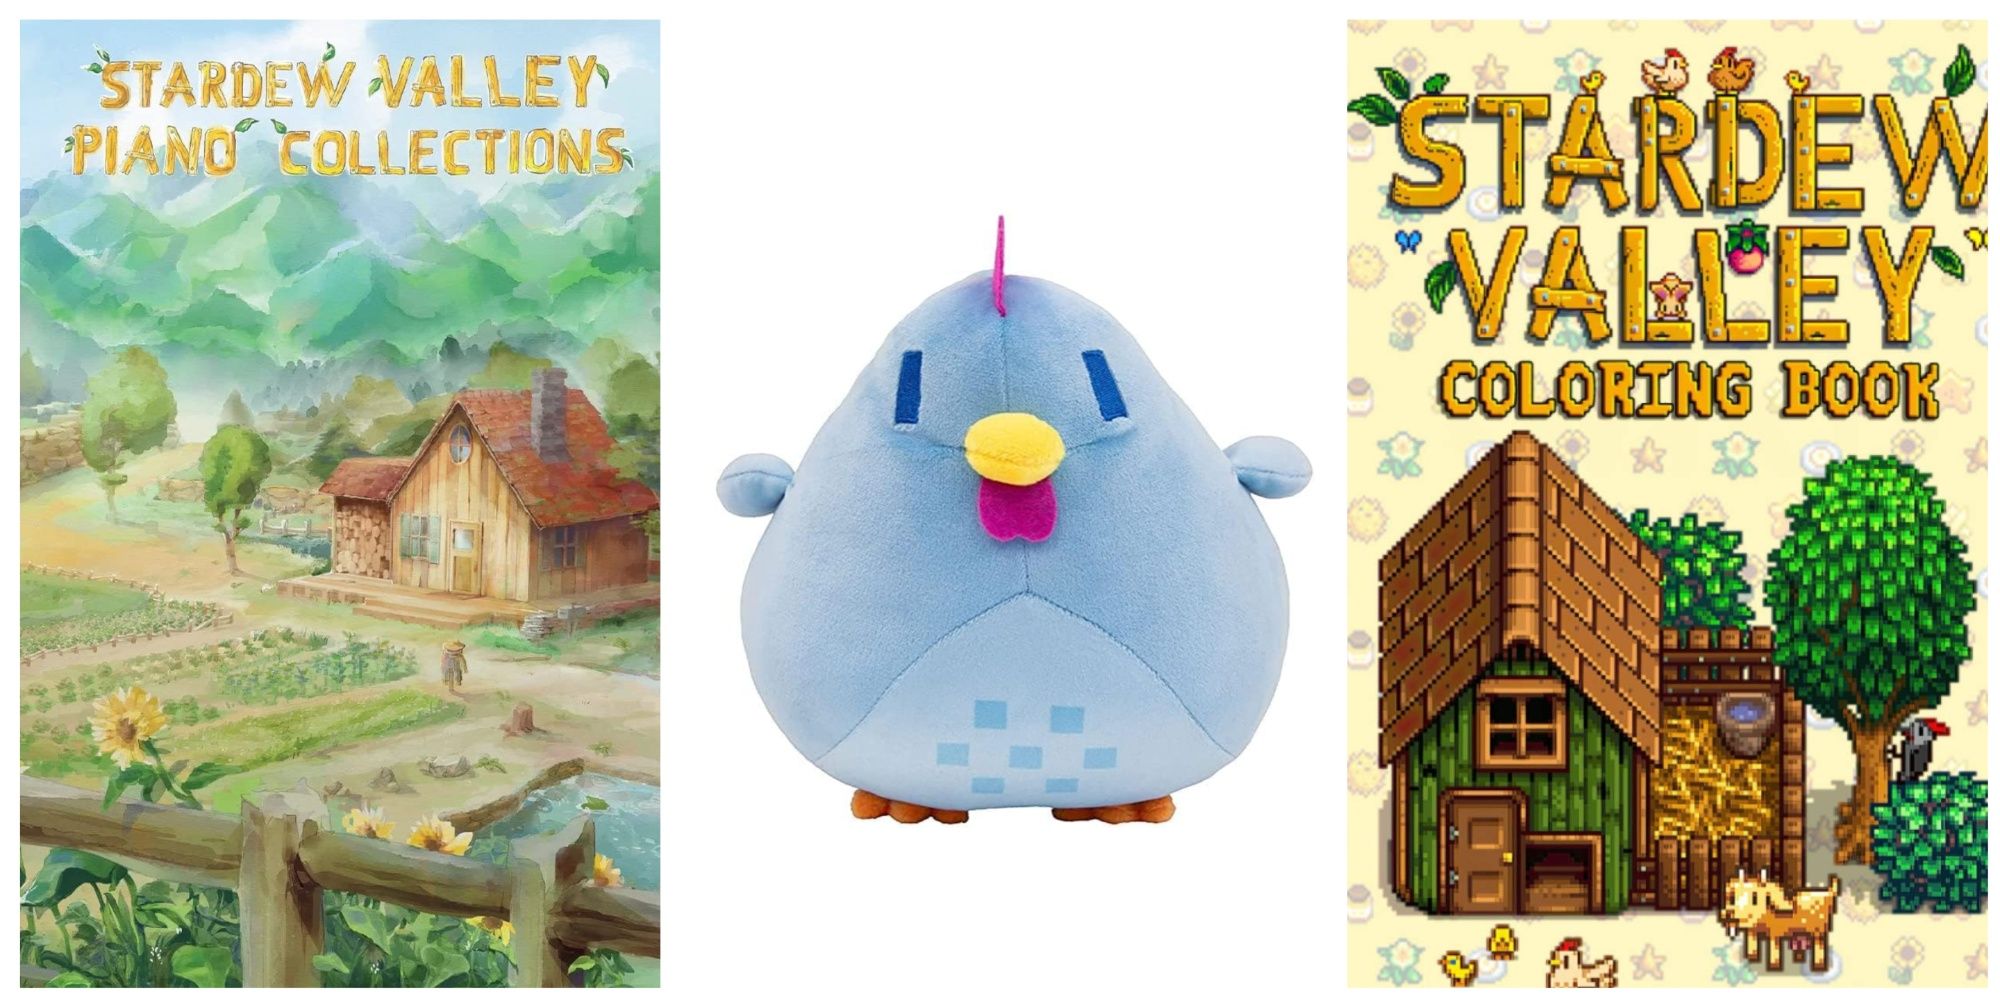 Three Stardew Valley merch pieces: the Piano Sheet Music collection, the OZIF blue chicken, and Yoichi Ito's coloring book.